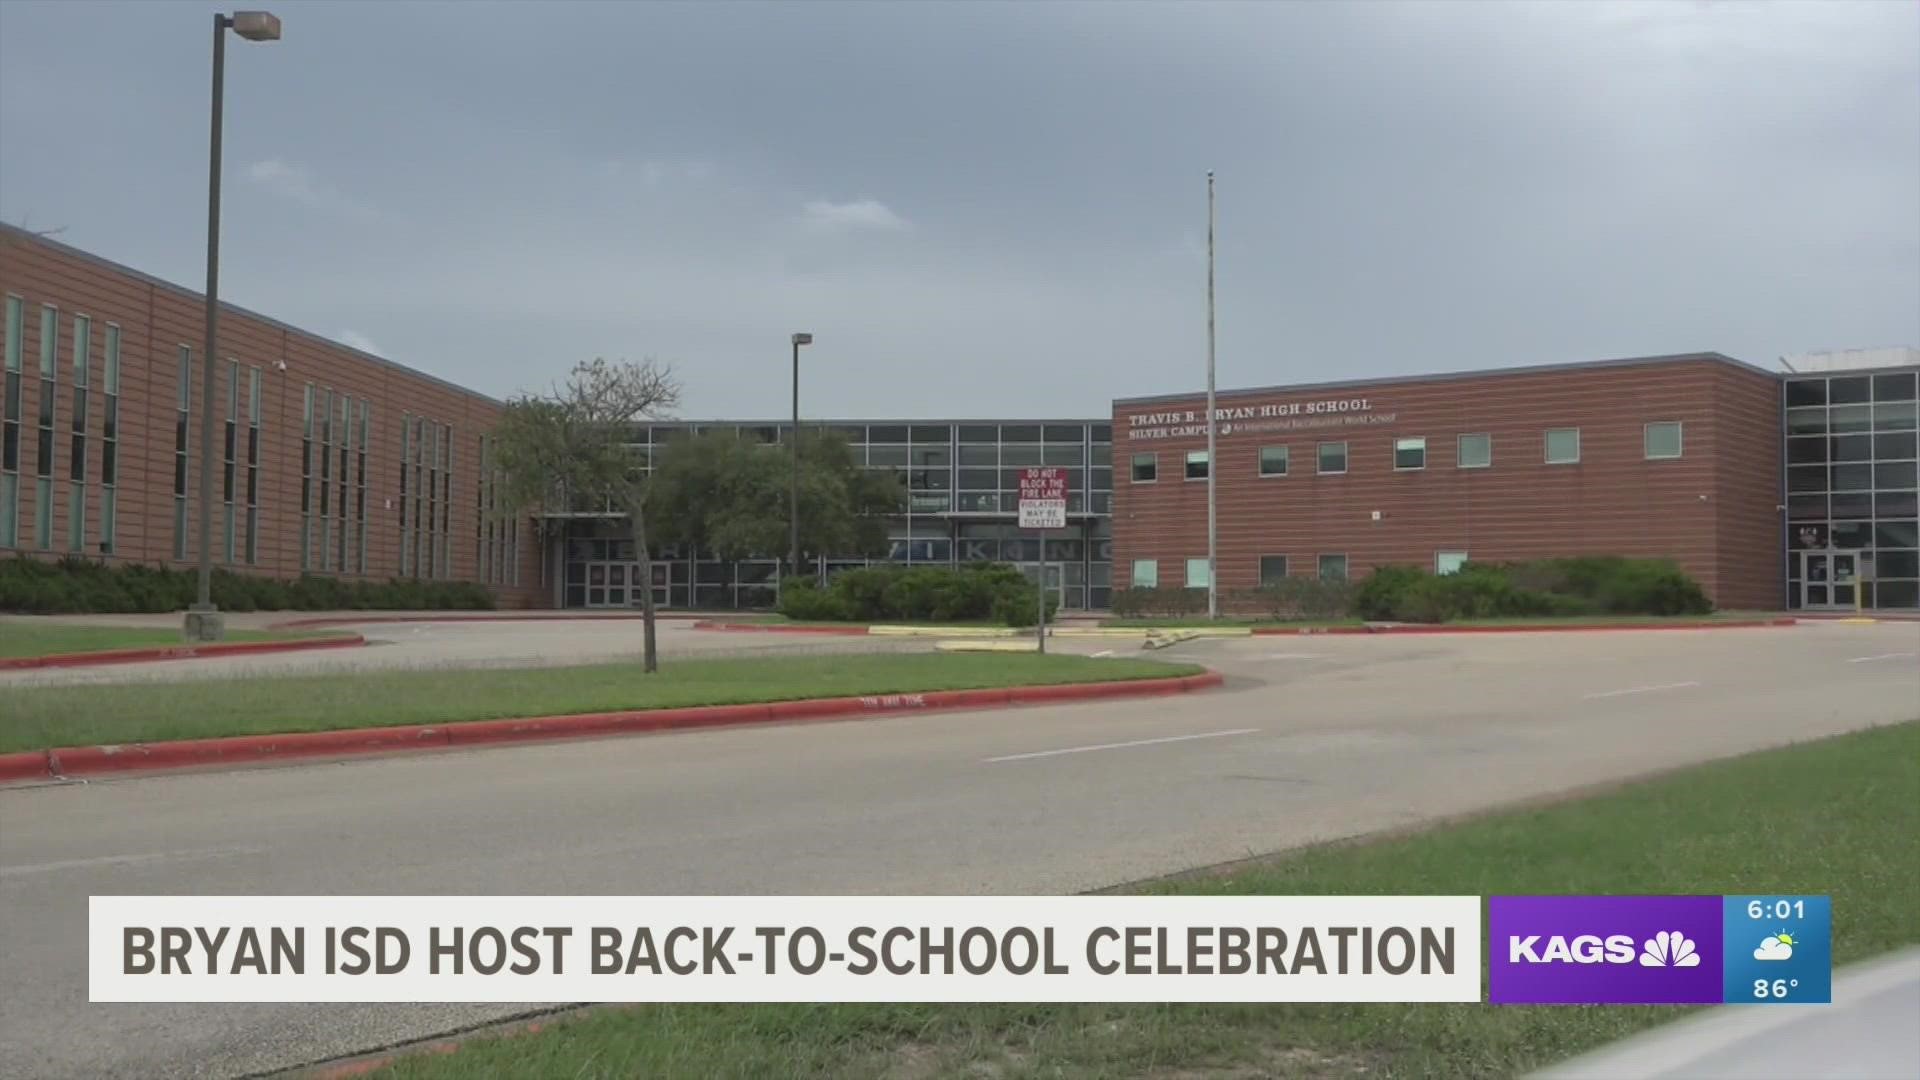 Bryan ISD hosted its back-to-school kickoff to get everyone in BISD fired up about the upcoming year.